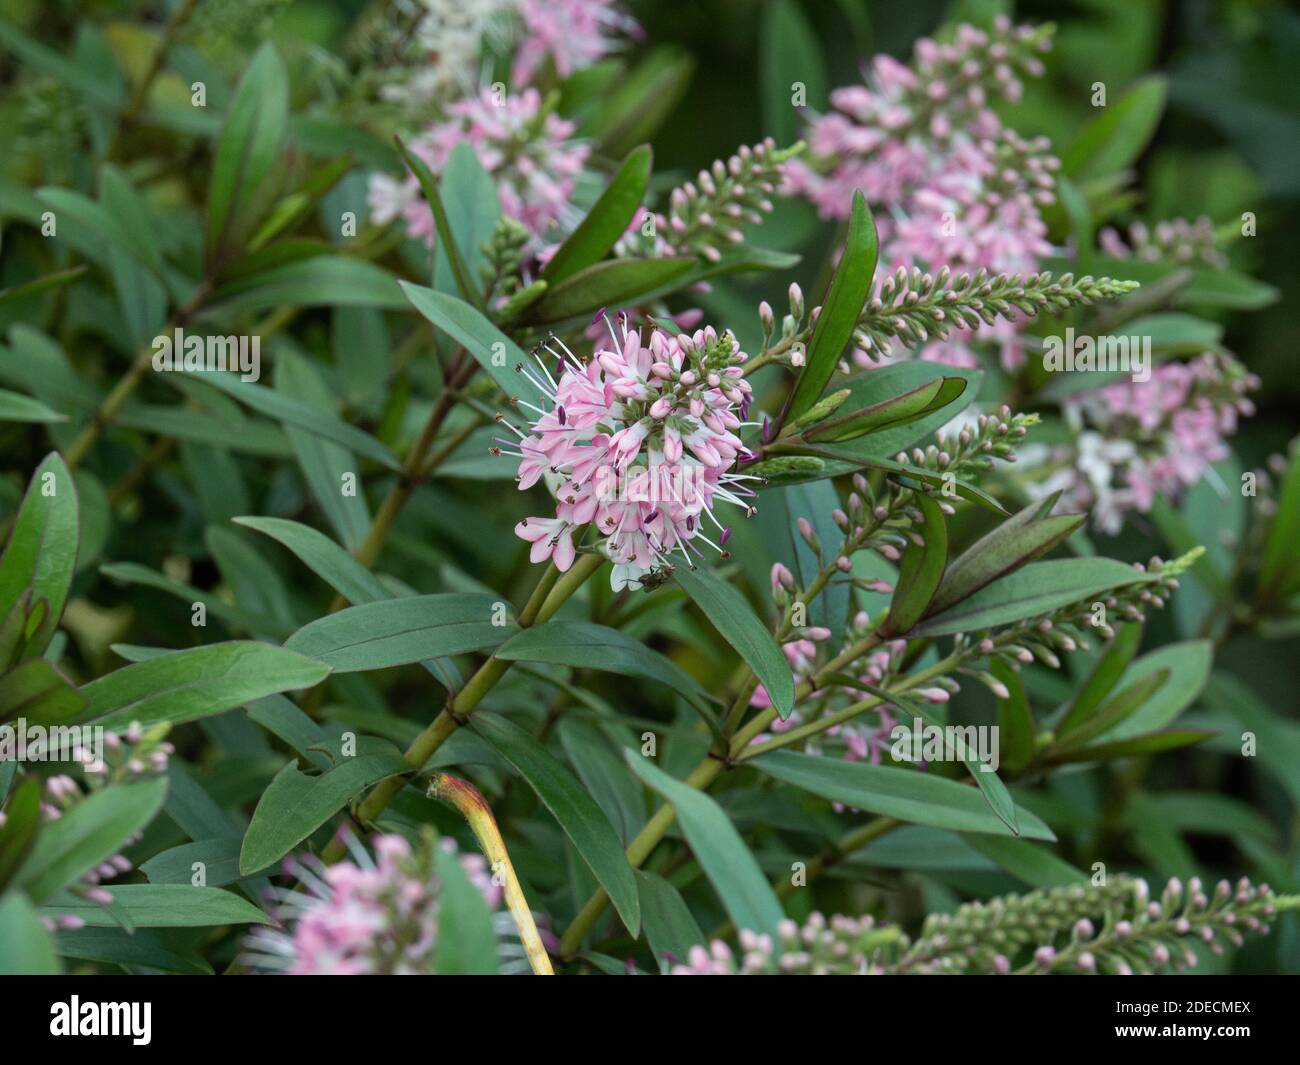 The pale pink flowers of the Hebe Nicola's Blush against a background of the thin foliage Stock Photo